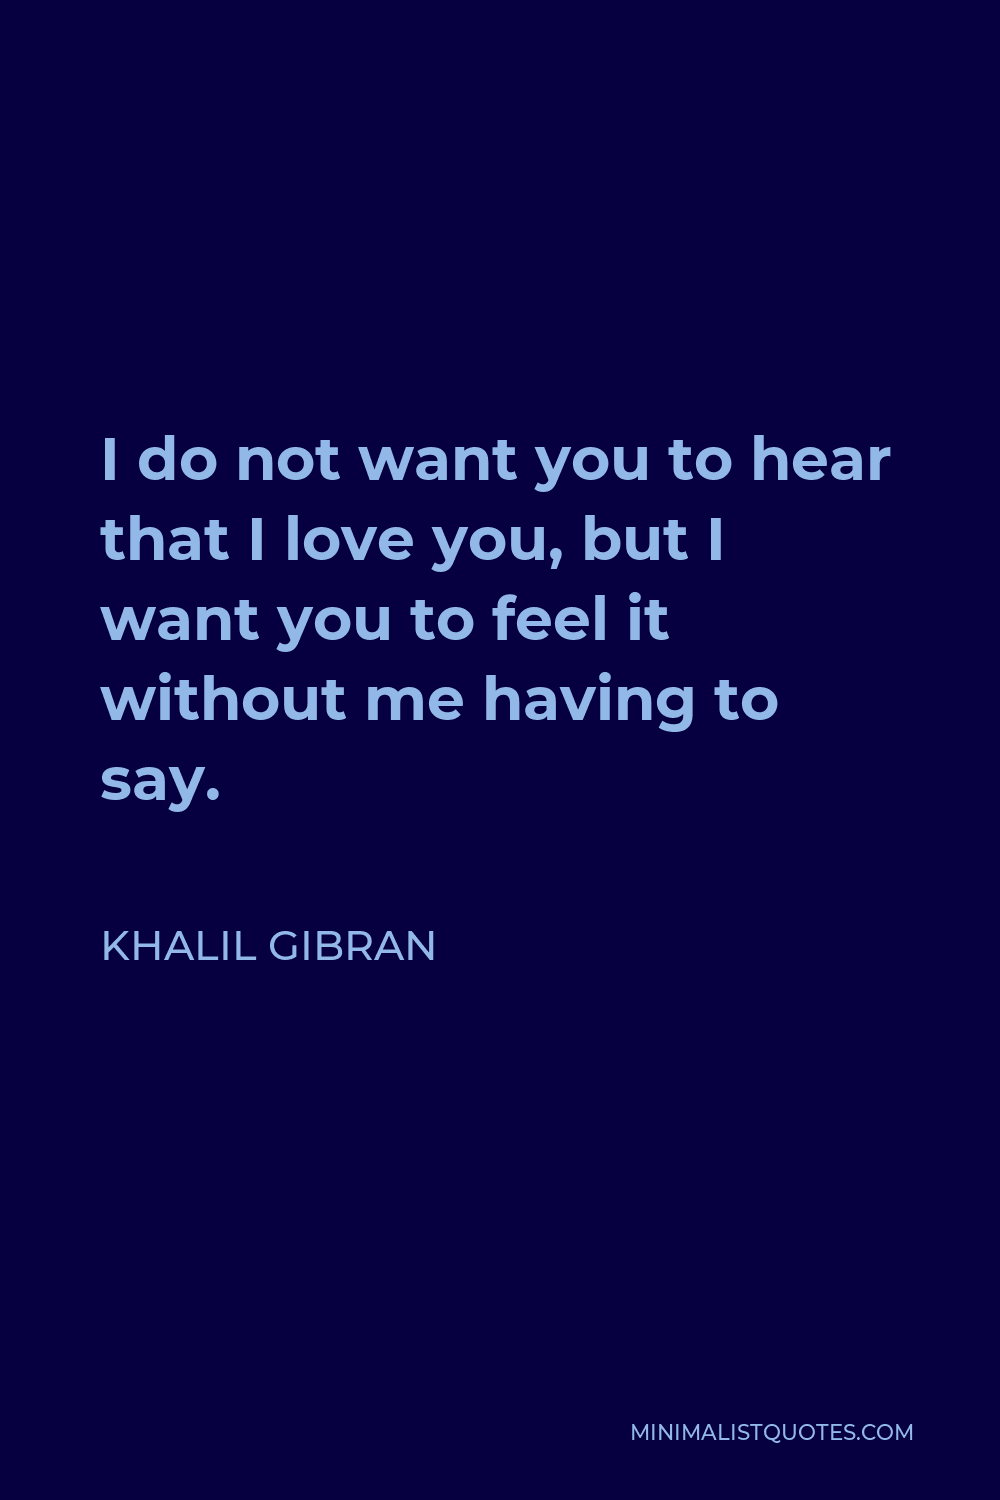 Khalil Gibran Quote - I do not want you to hear that I love you, but I want you to feel it without me having to say.